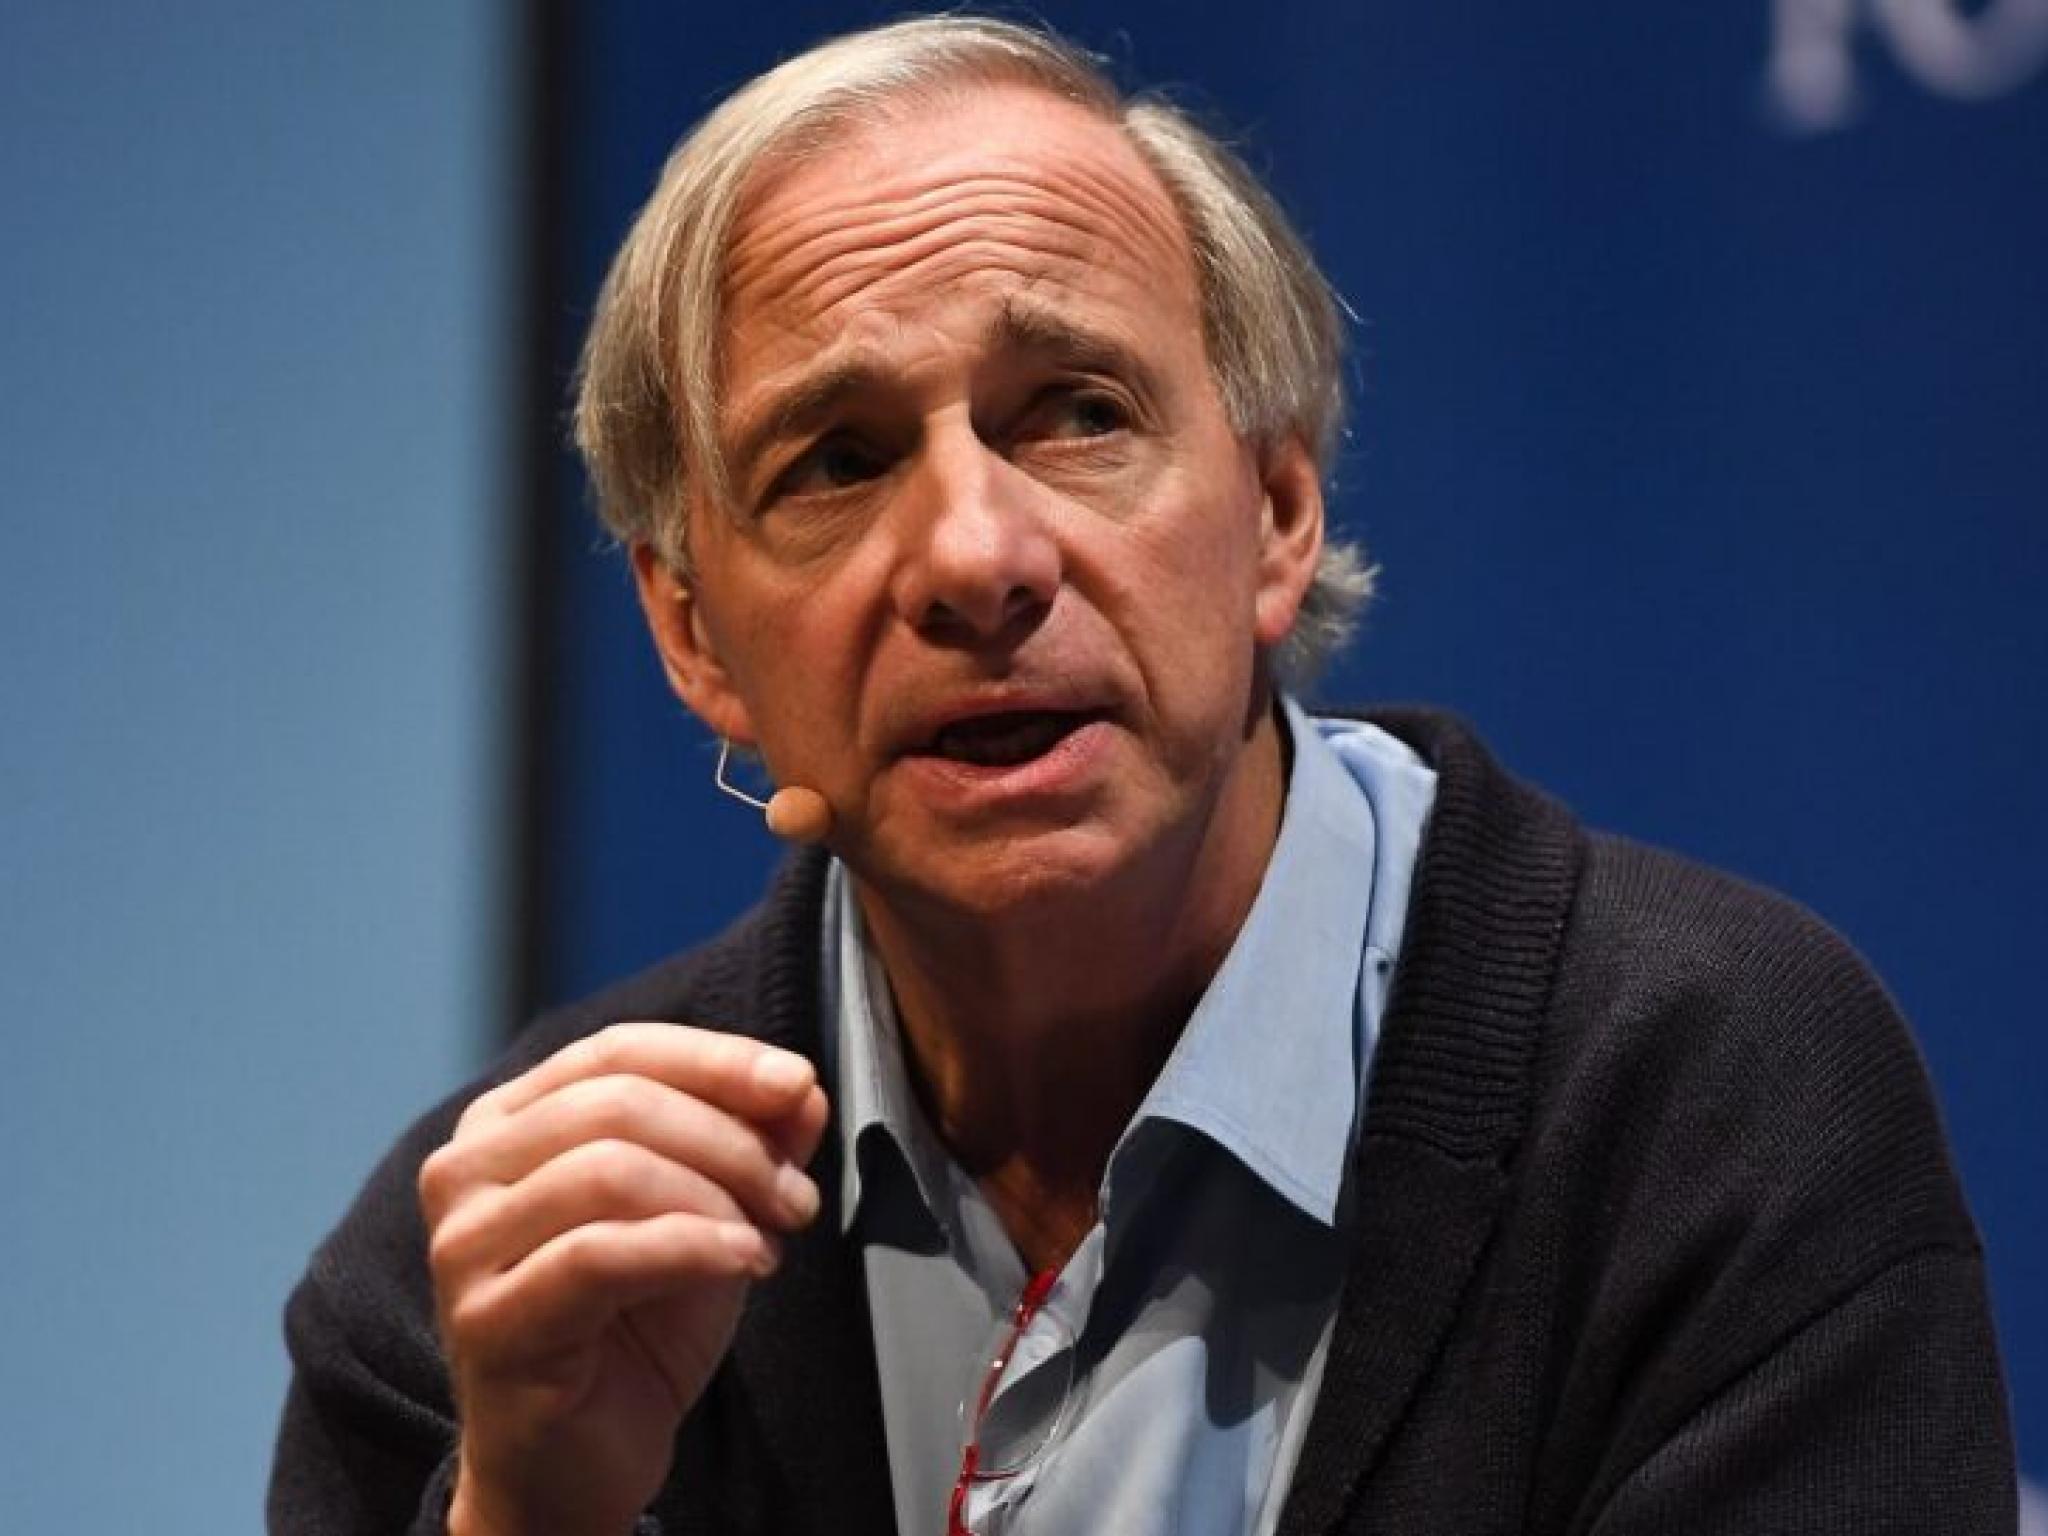  billionaire-ray-dalio-shuns-bonds-embraces-cash-whats-behind-his-strategy 